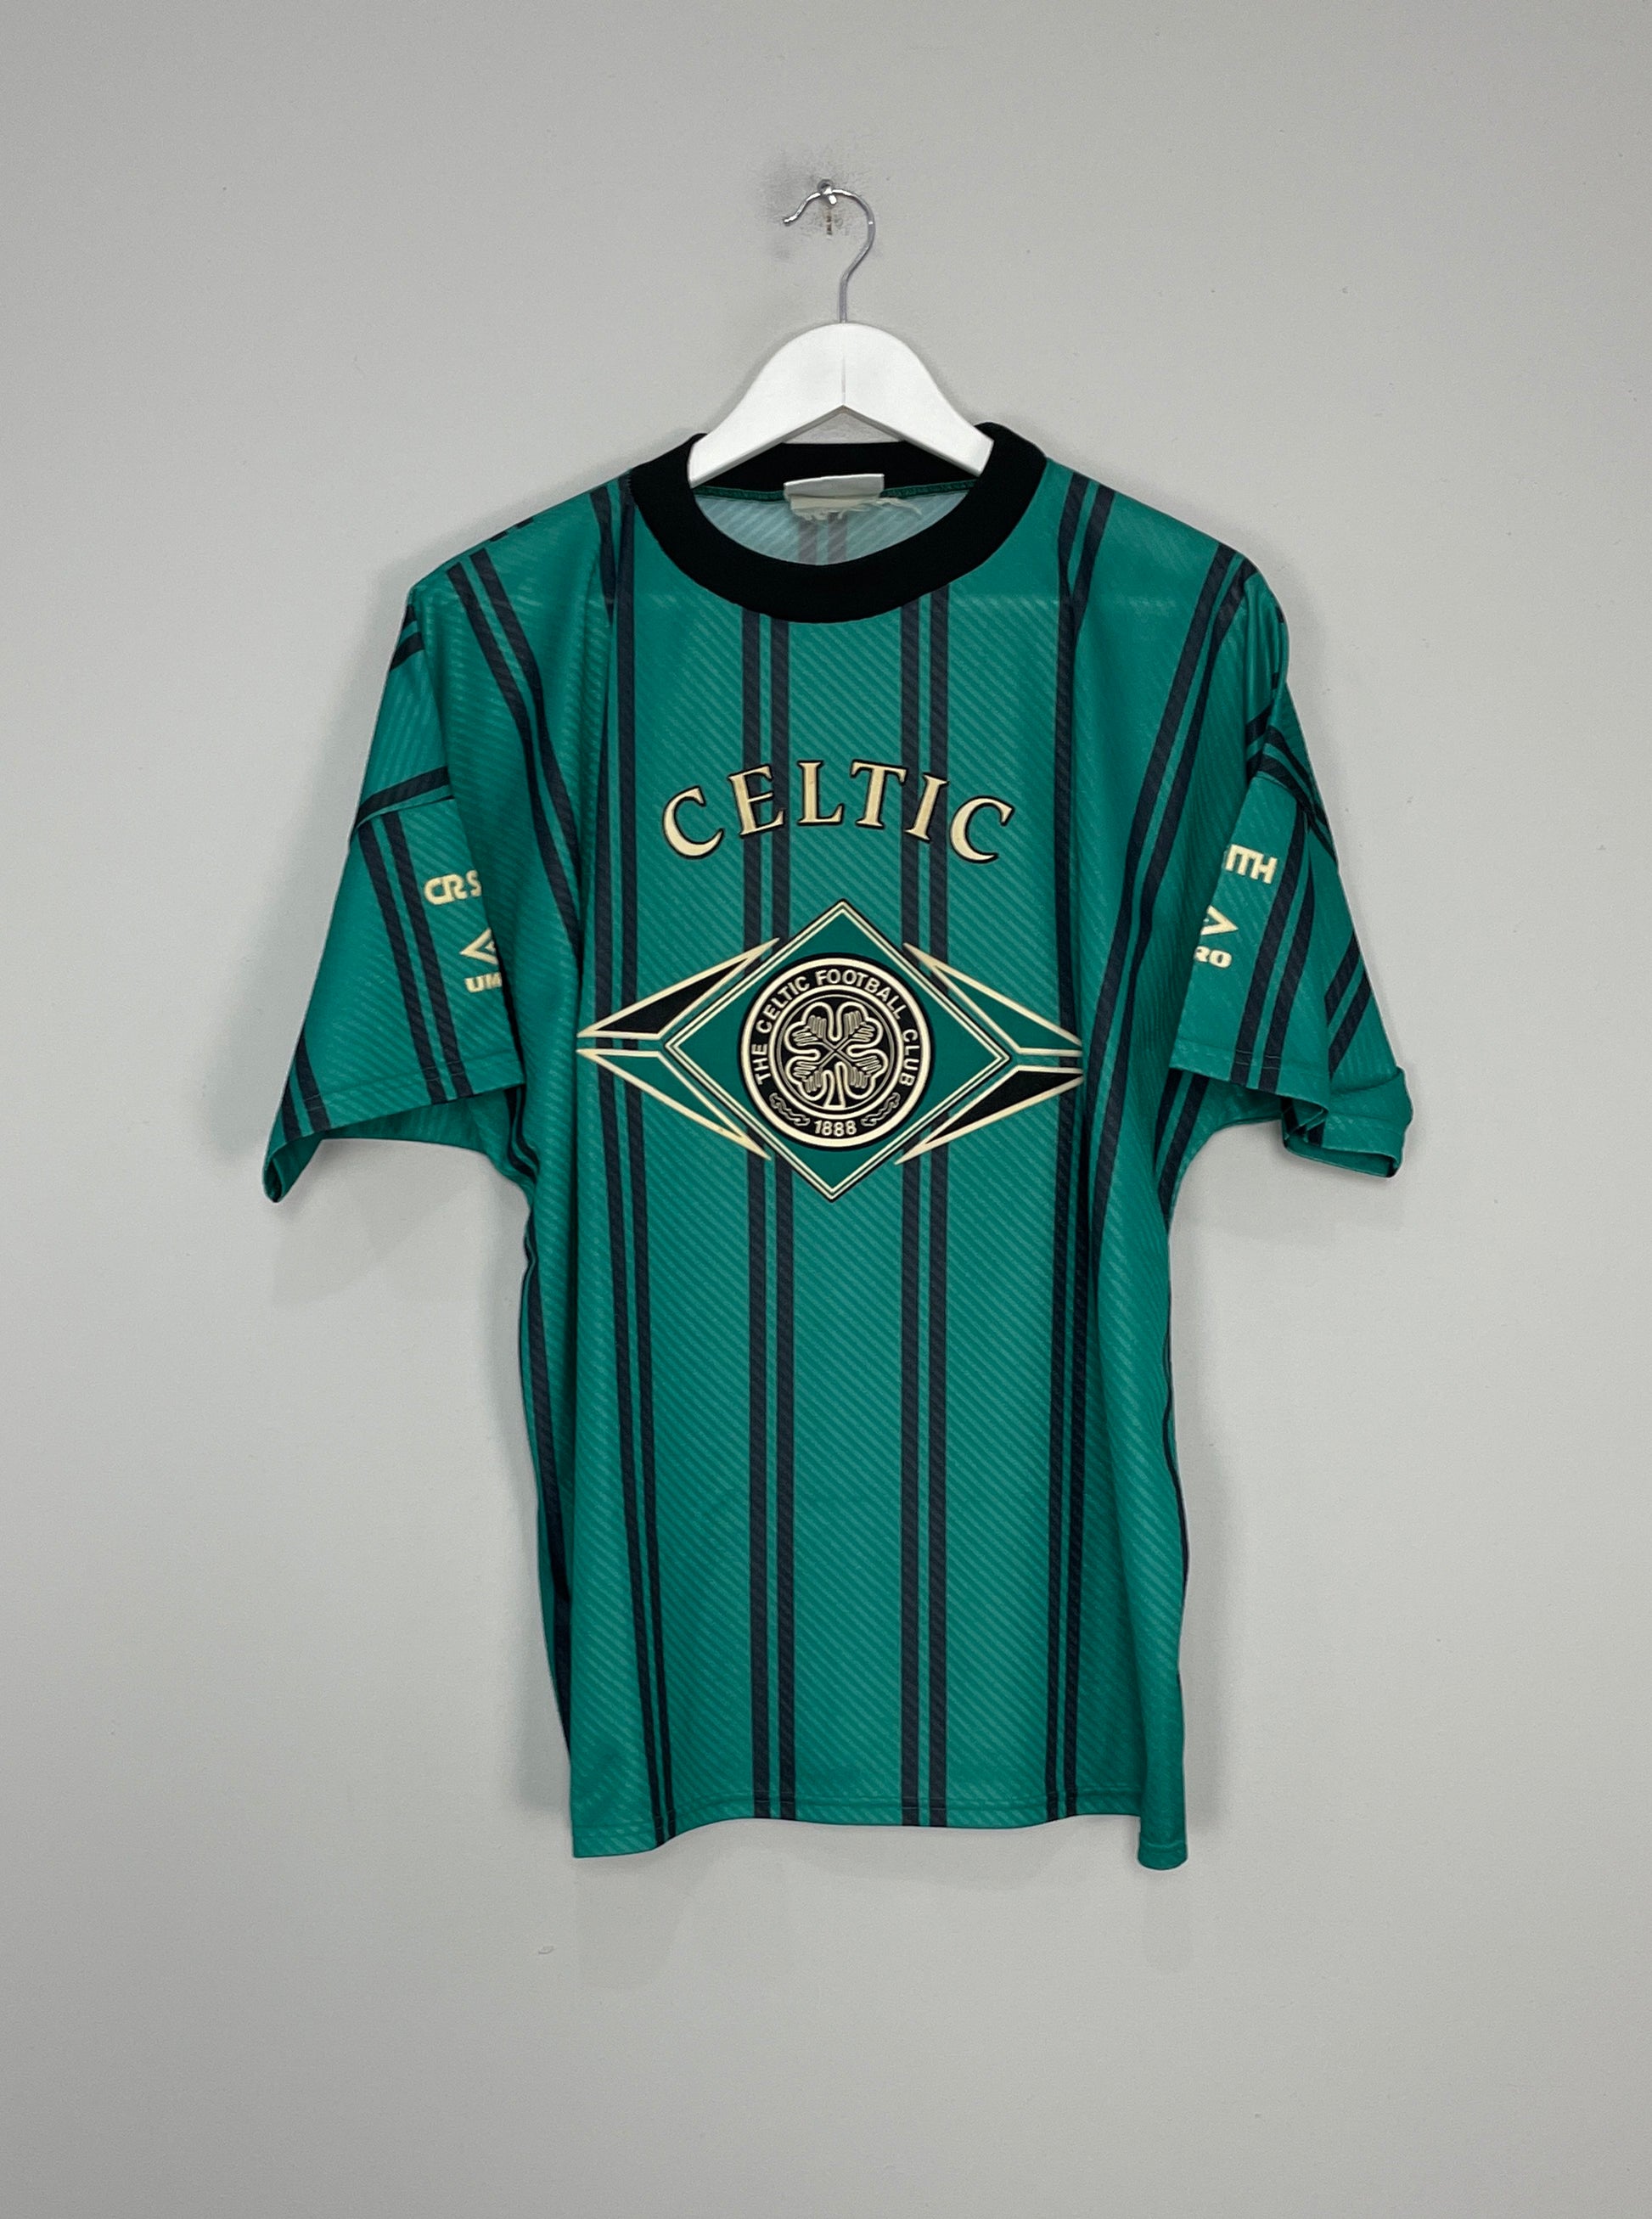 Old Celtic Goalkeeper football shirts and soccer jerseys